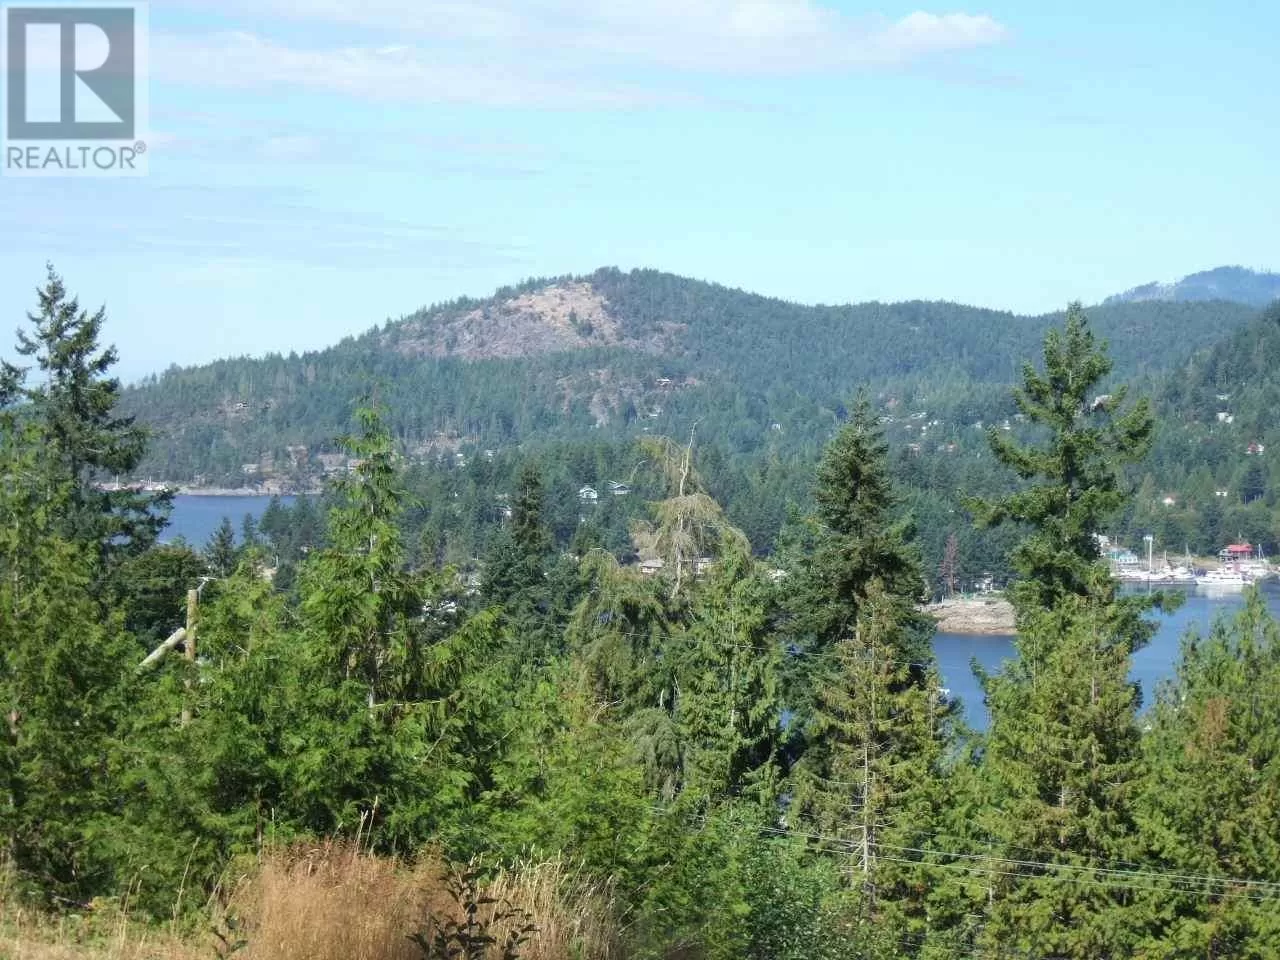 Lot 3 Cecil Hill Road, Pender Harbour, British Columbia V0N 2H0